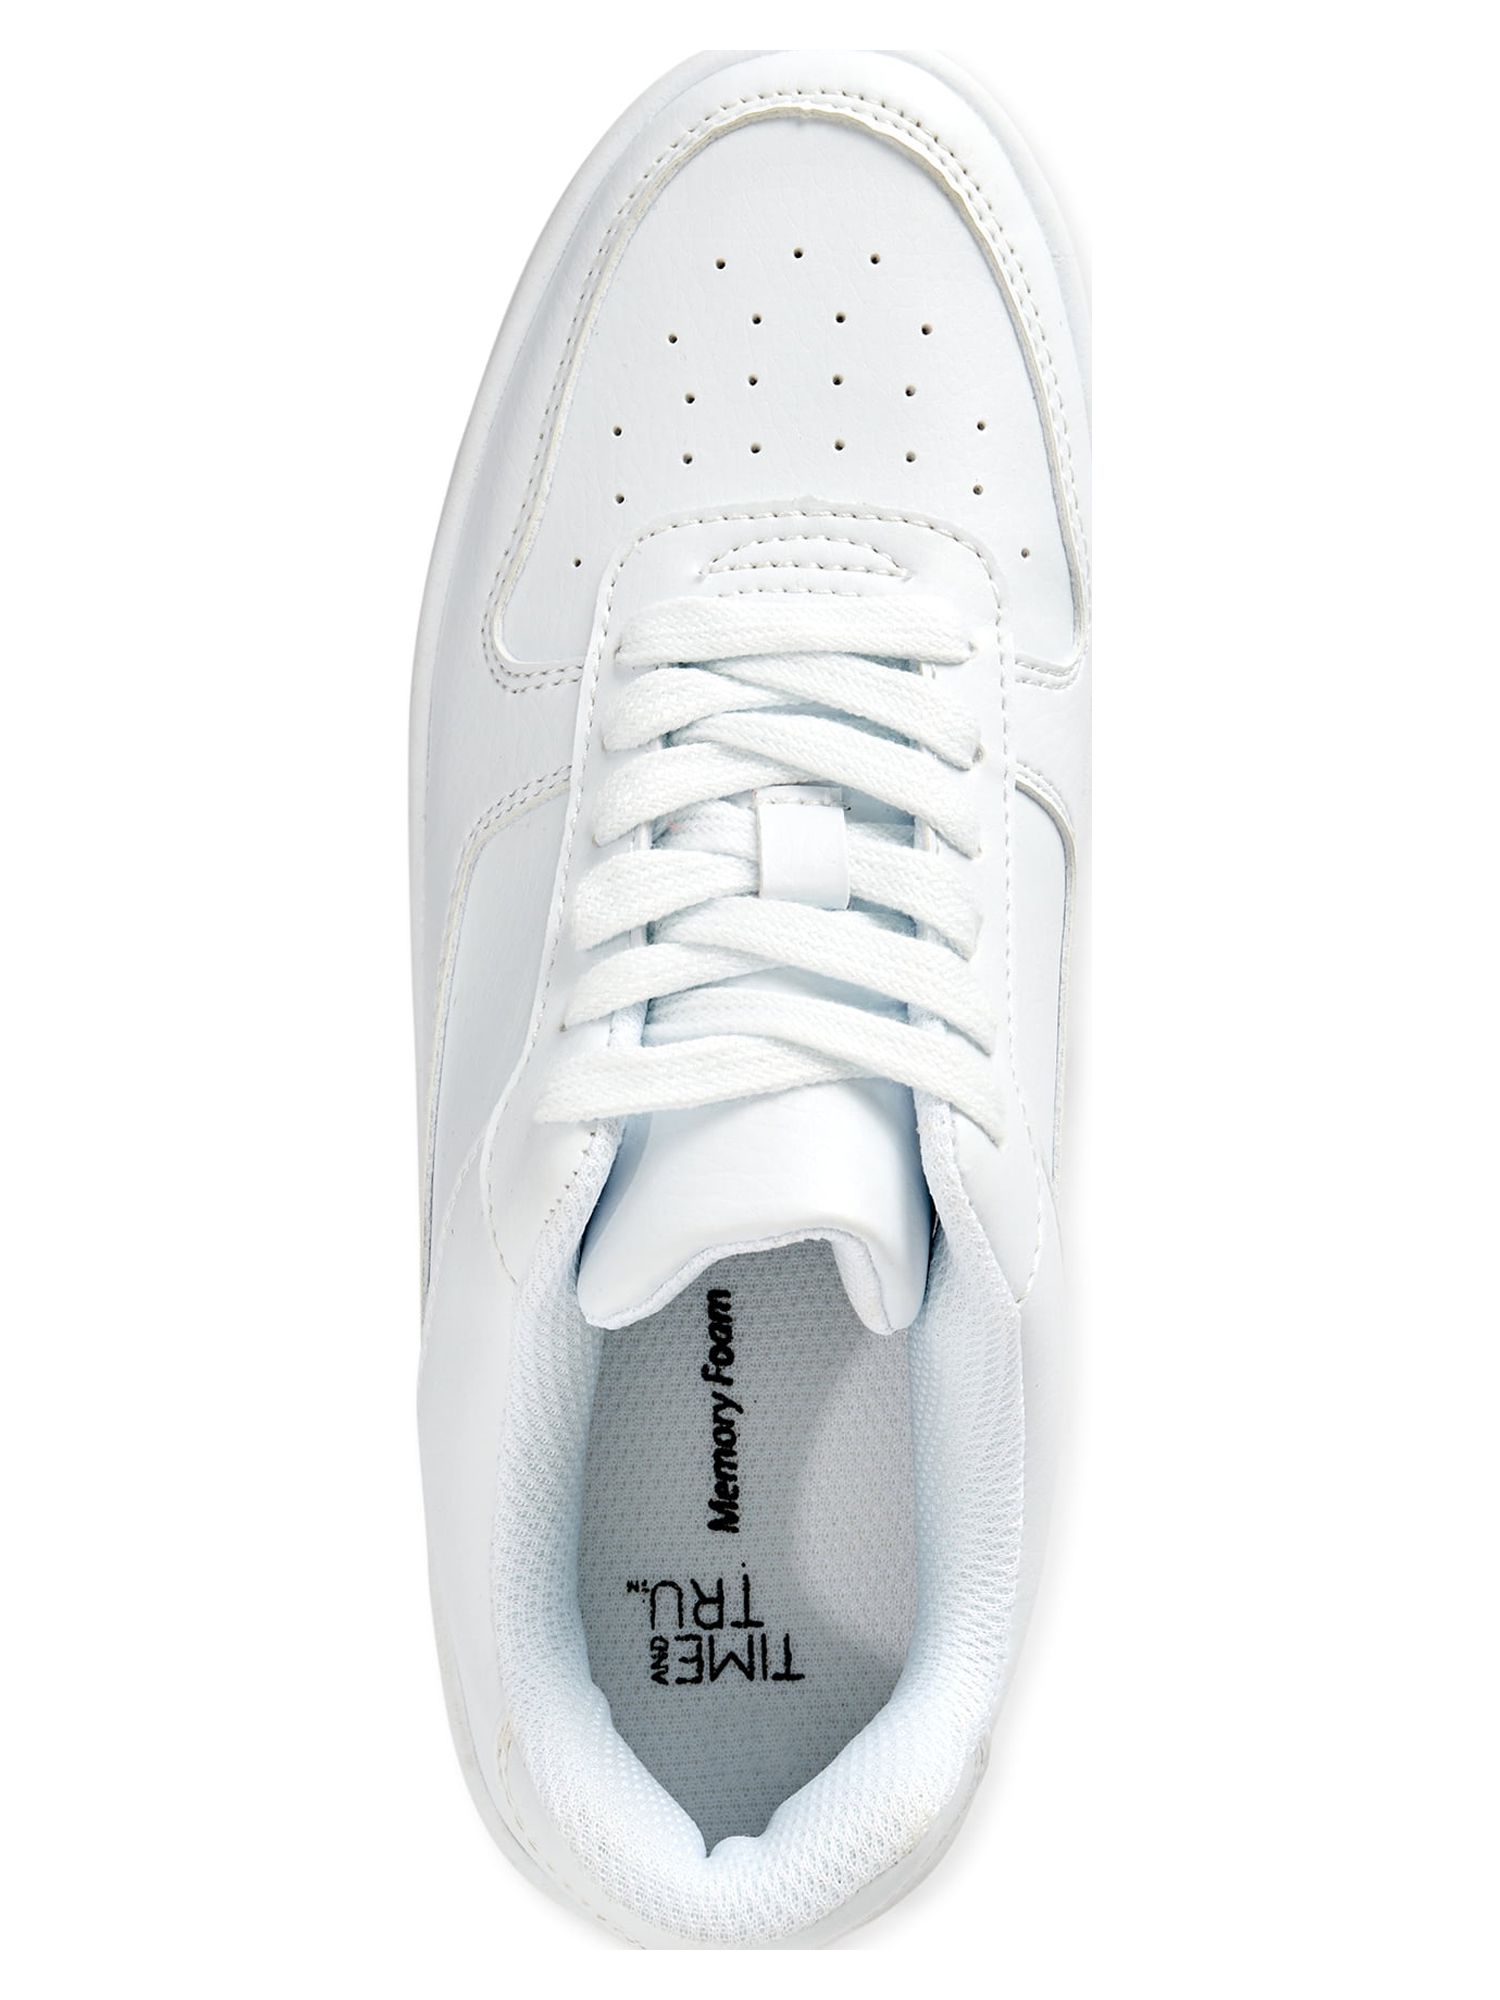 Time and Tru Women's Platform Sneakers (Wide Width Available) - image 5 of 7